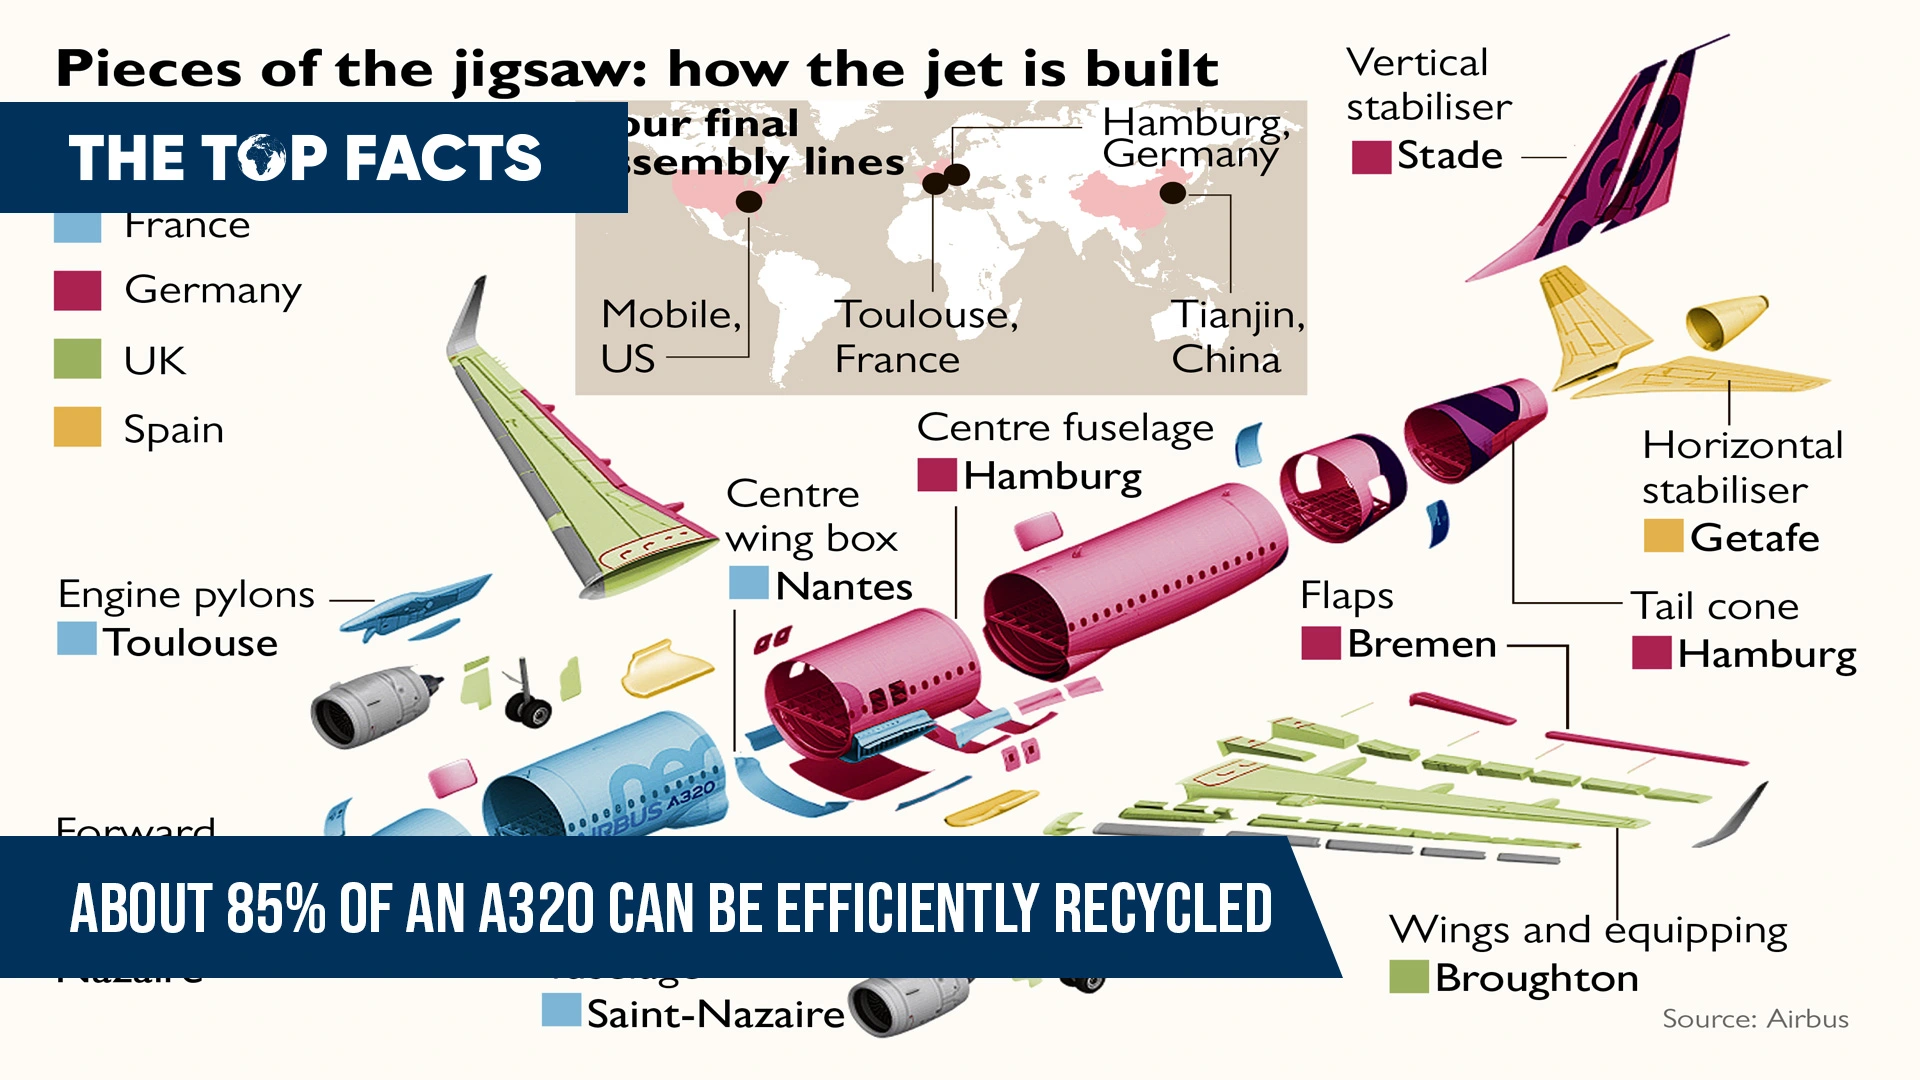 Approximately 85% of an Airbus A320 can be recycled efficiently at the end of its lifetime.